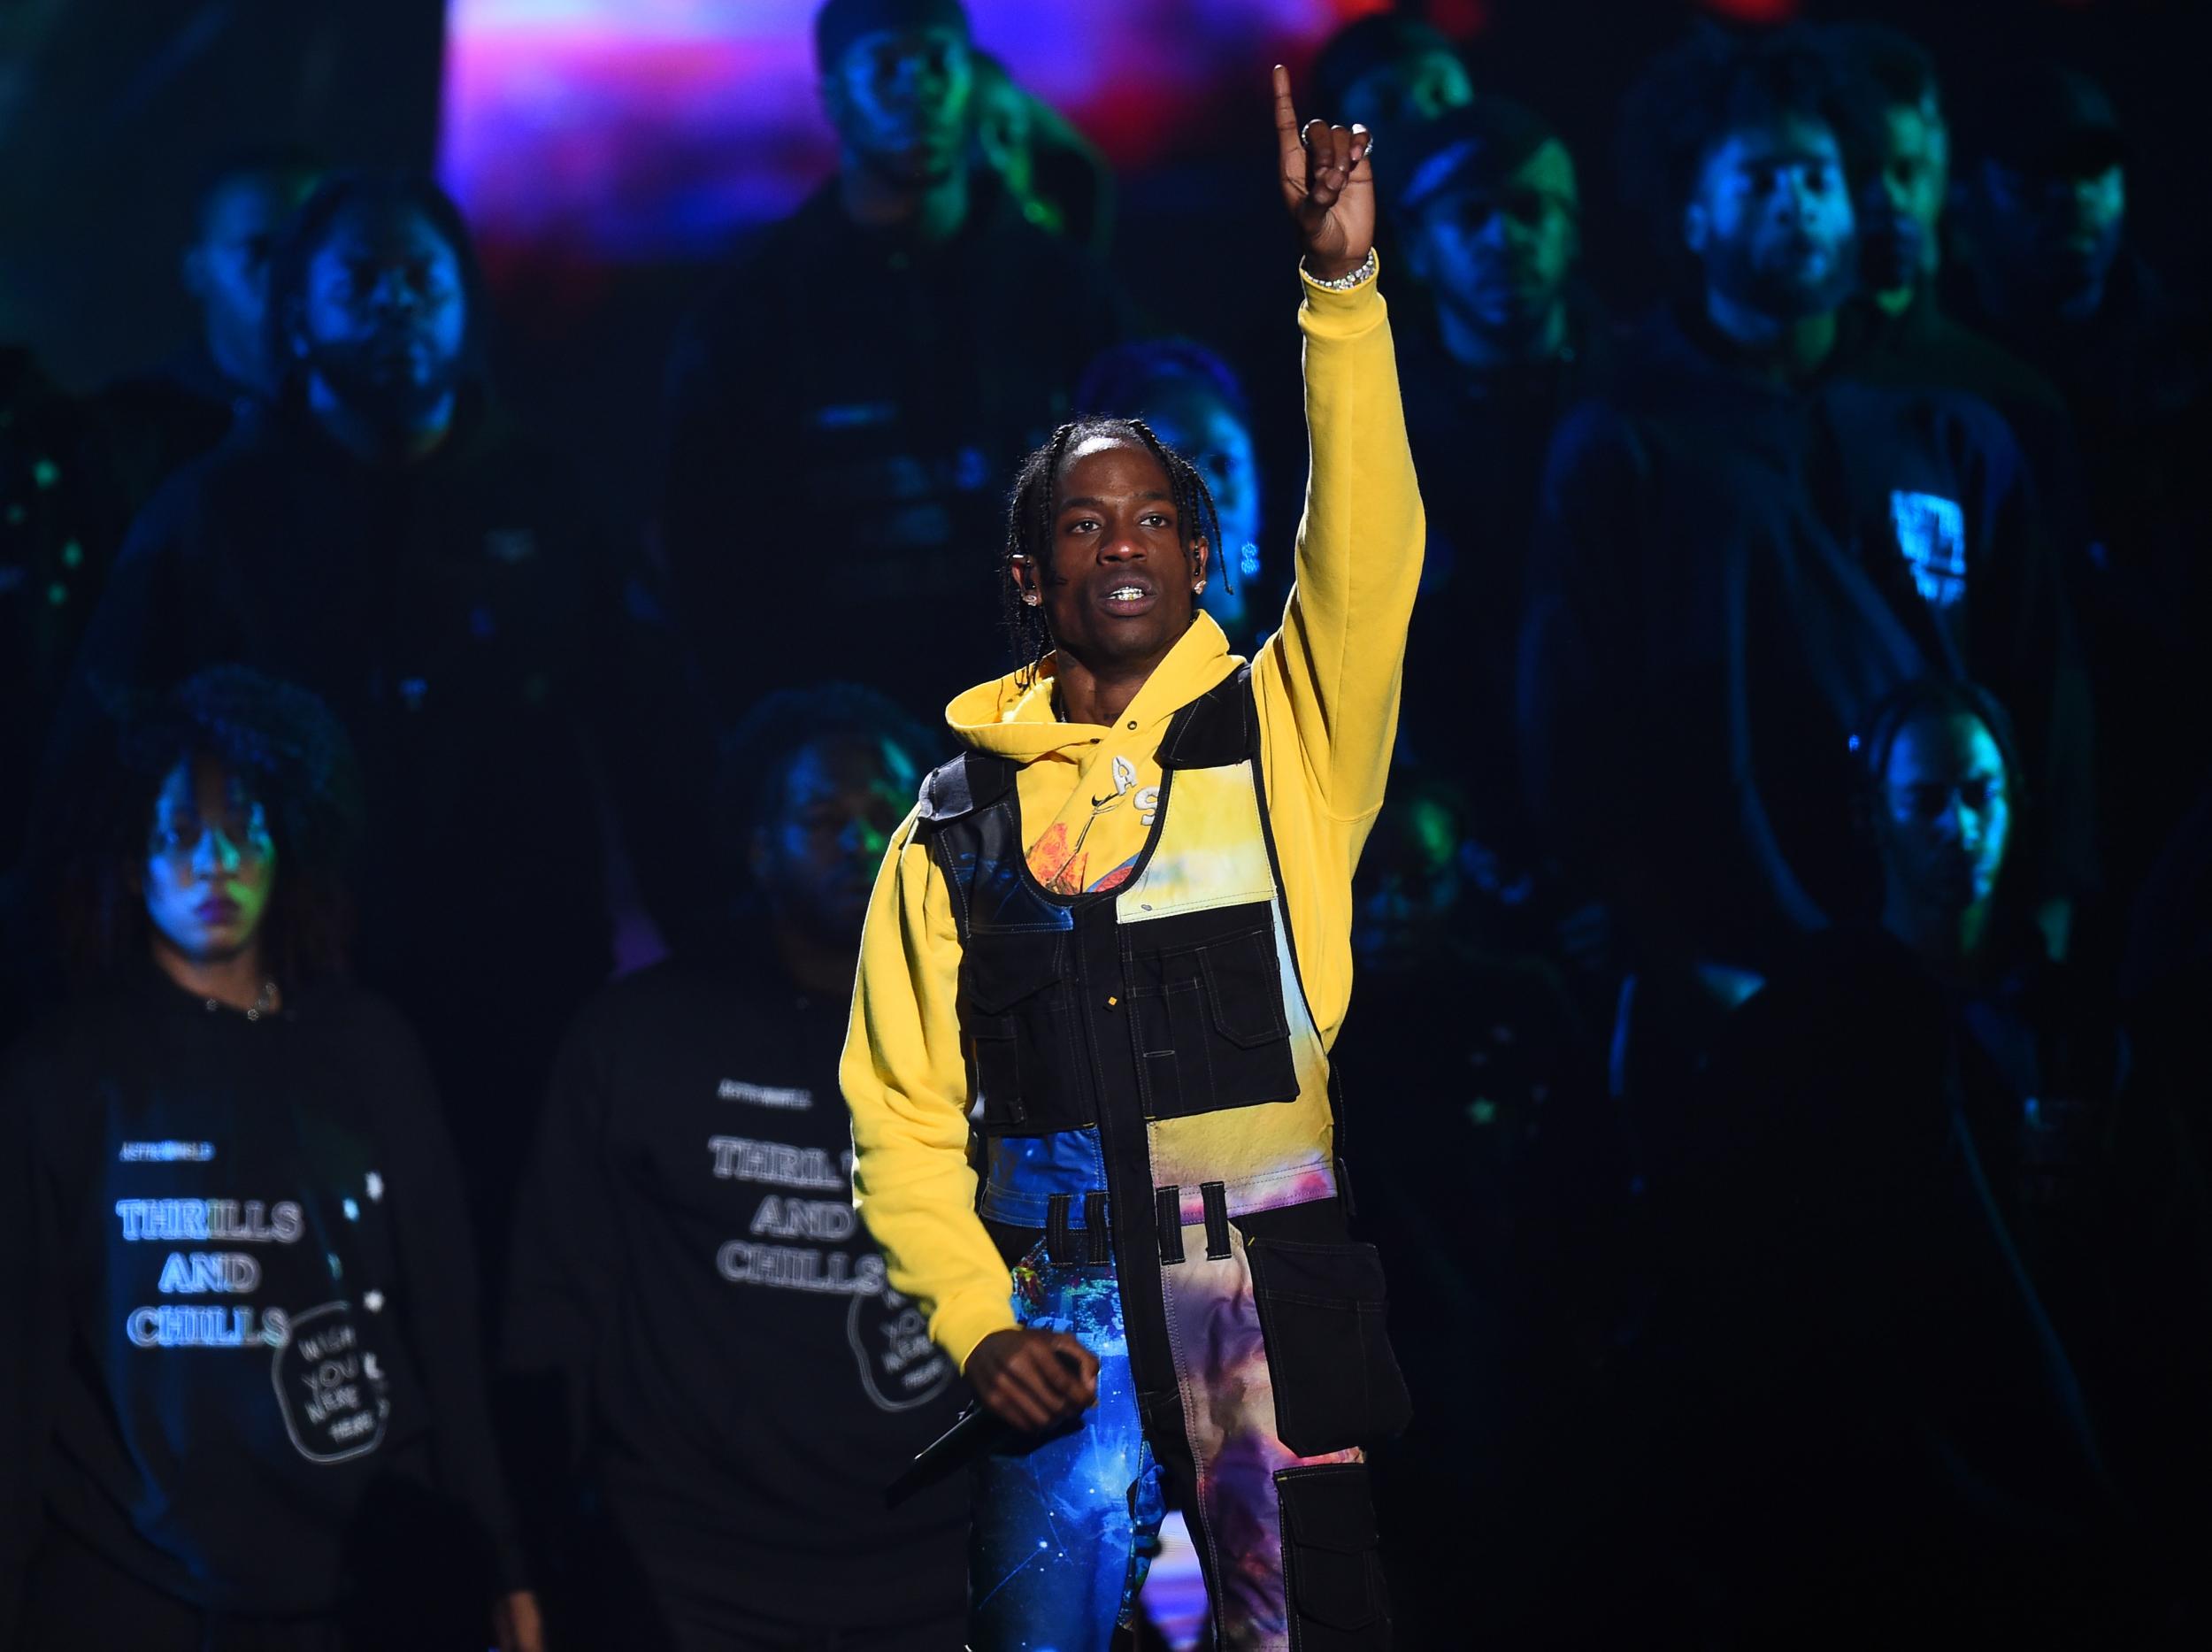 Travis Scott will perform at the 2019 Super Bowl halftime show